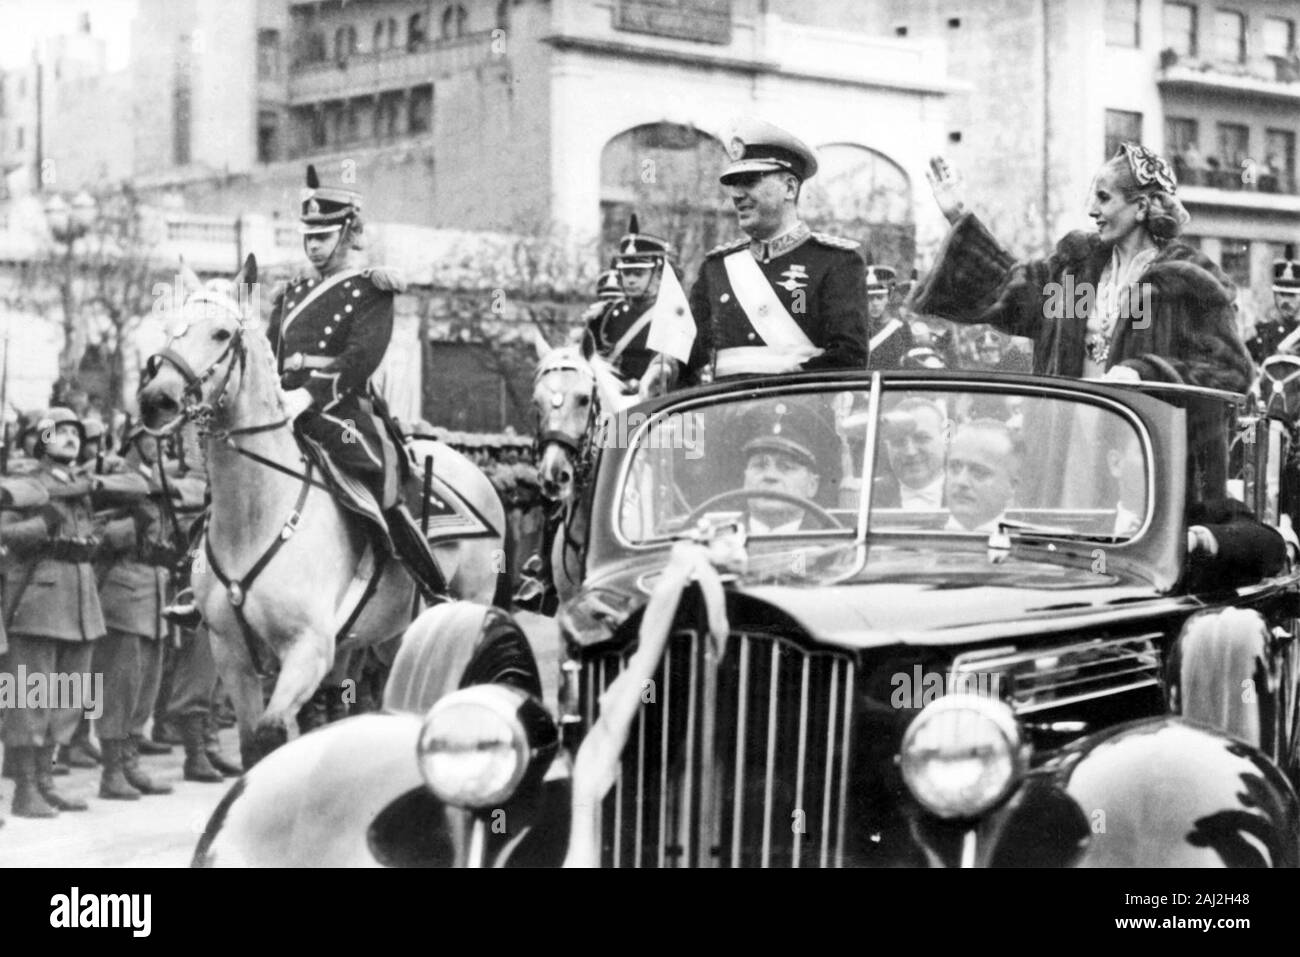 JUAN PERON (1895-1974) President of Argentina and the ailing Evita at his second inaugural parade 9 June 1952. She died the following month. Stock Photo